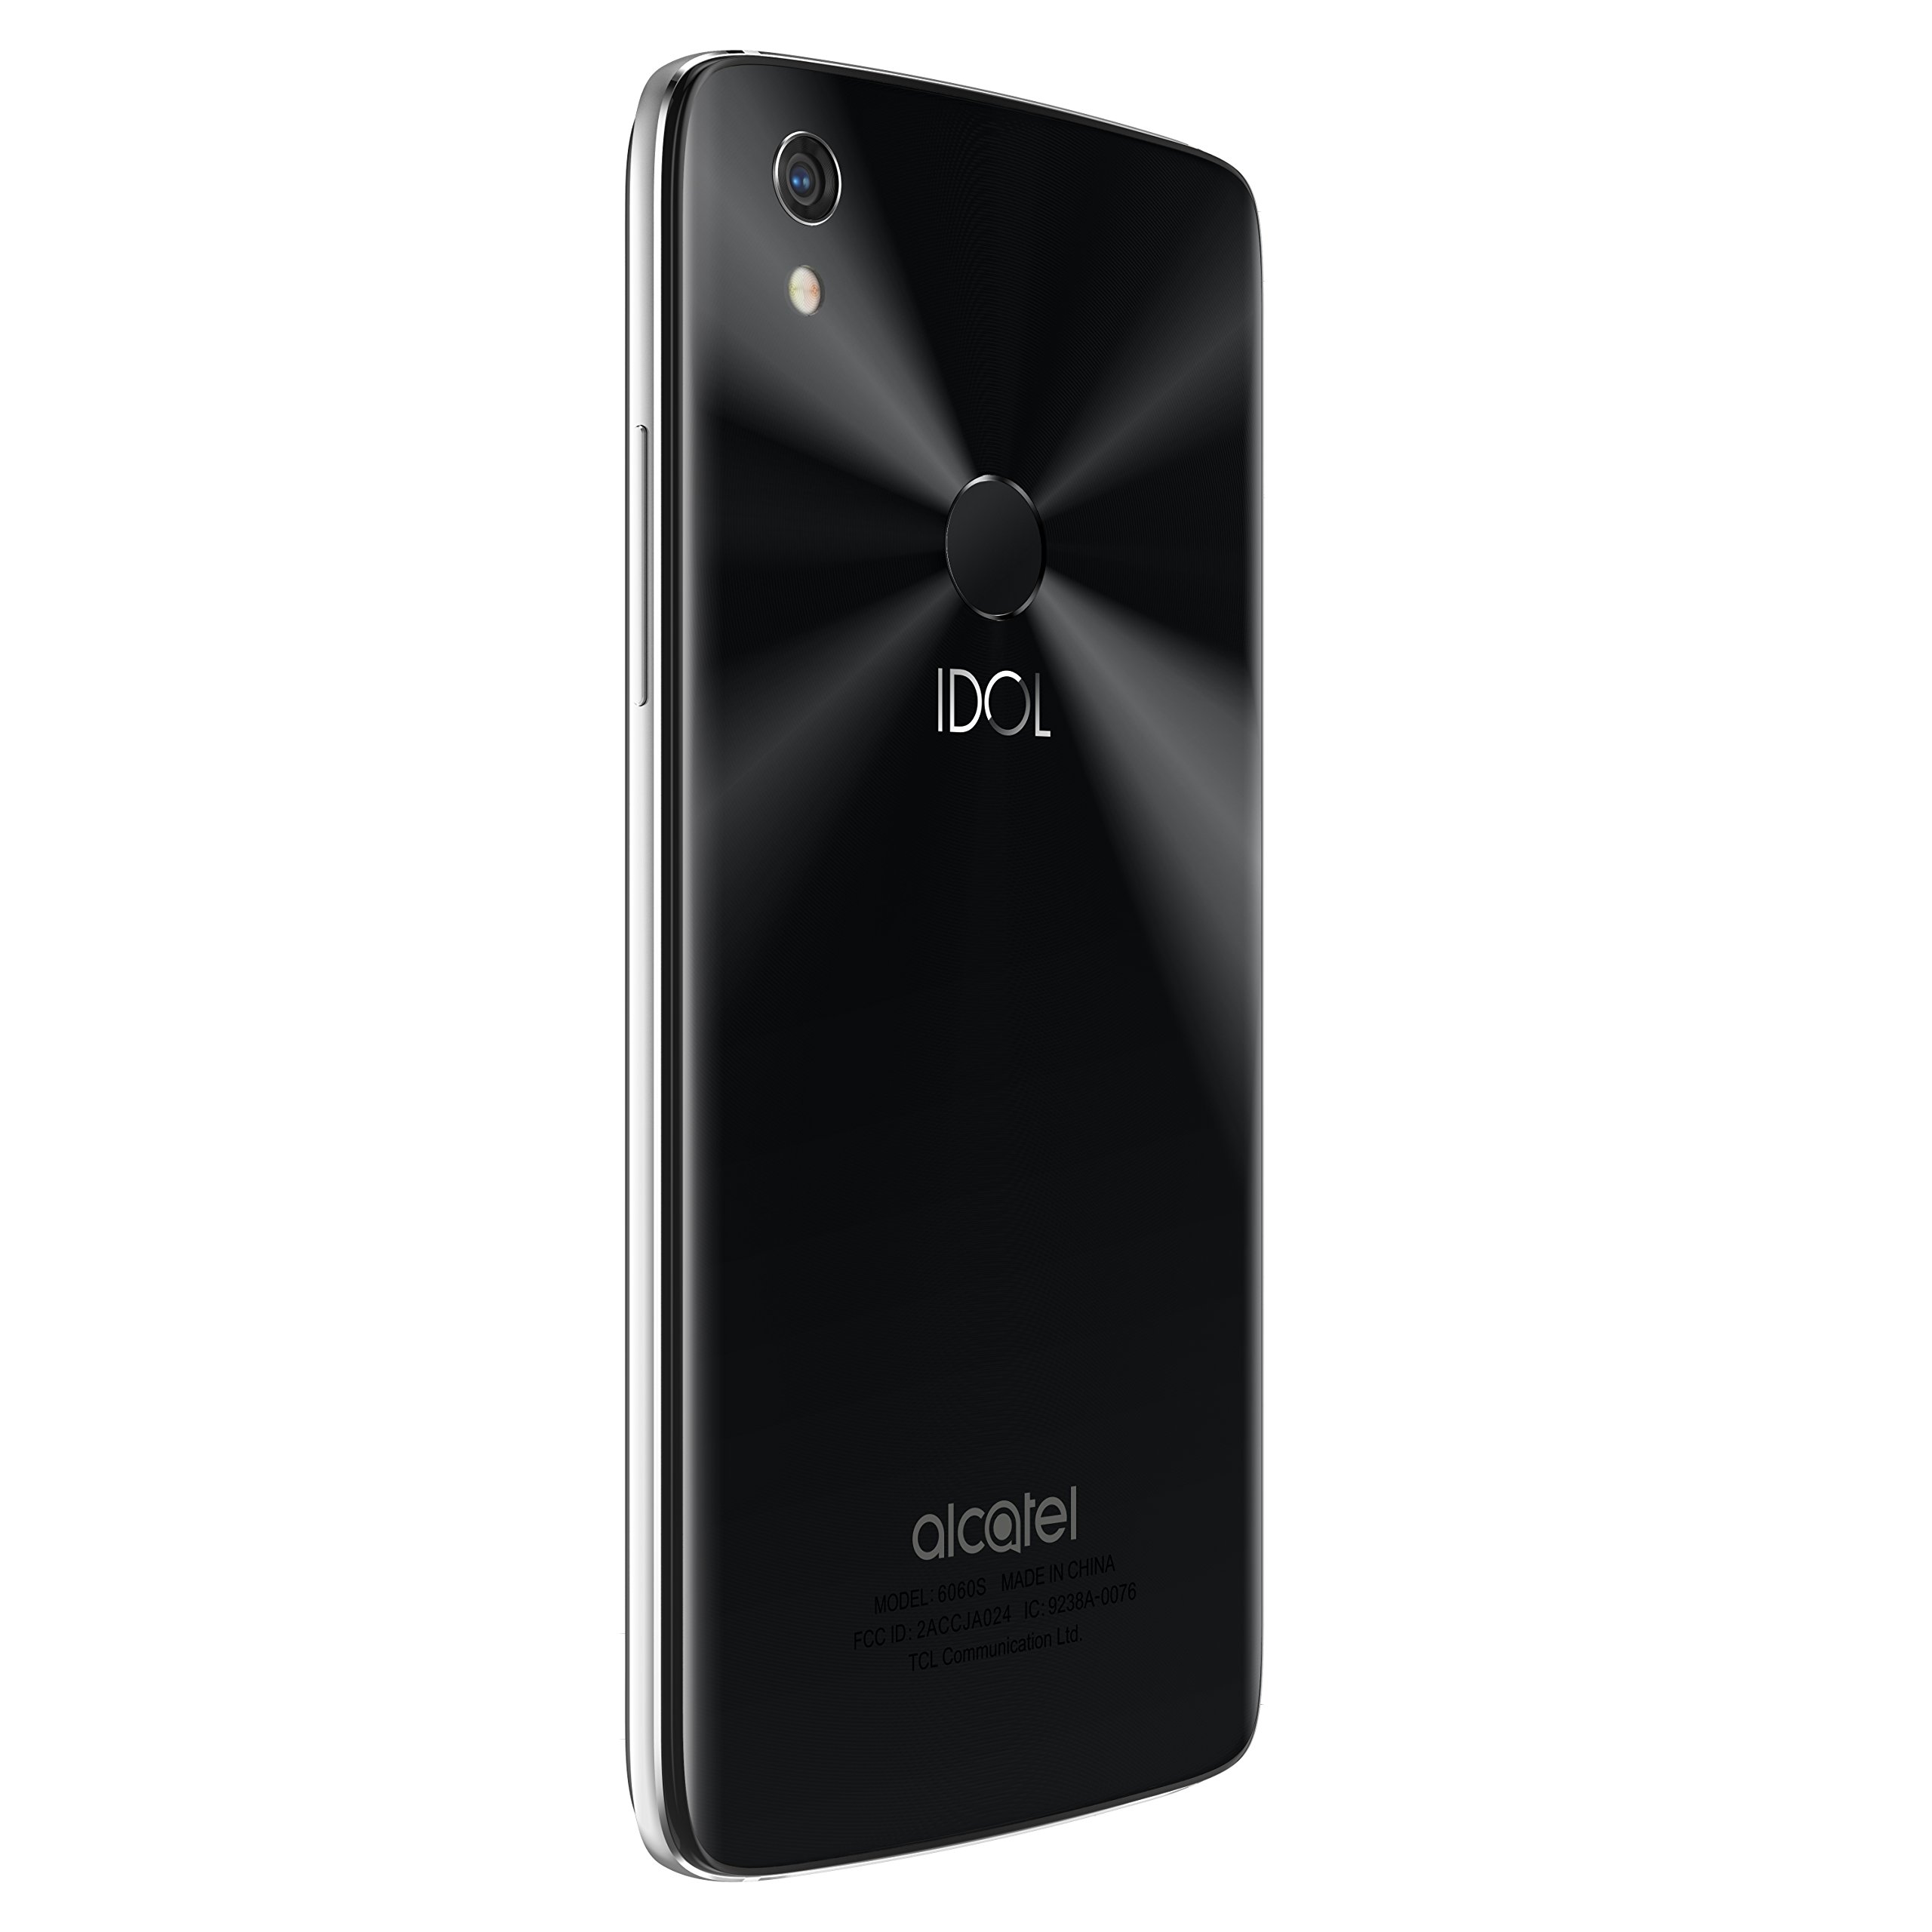 Alcatel Idol 5S - 32 GB - Unlocked (AT&T/Sprint/T-Mobile/Verizon) - Crystal Grey - Prime Exclusive - with Lockscreen Offers & Ads